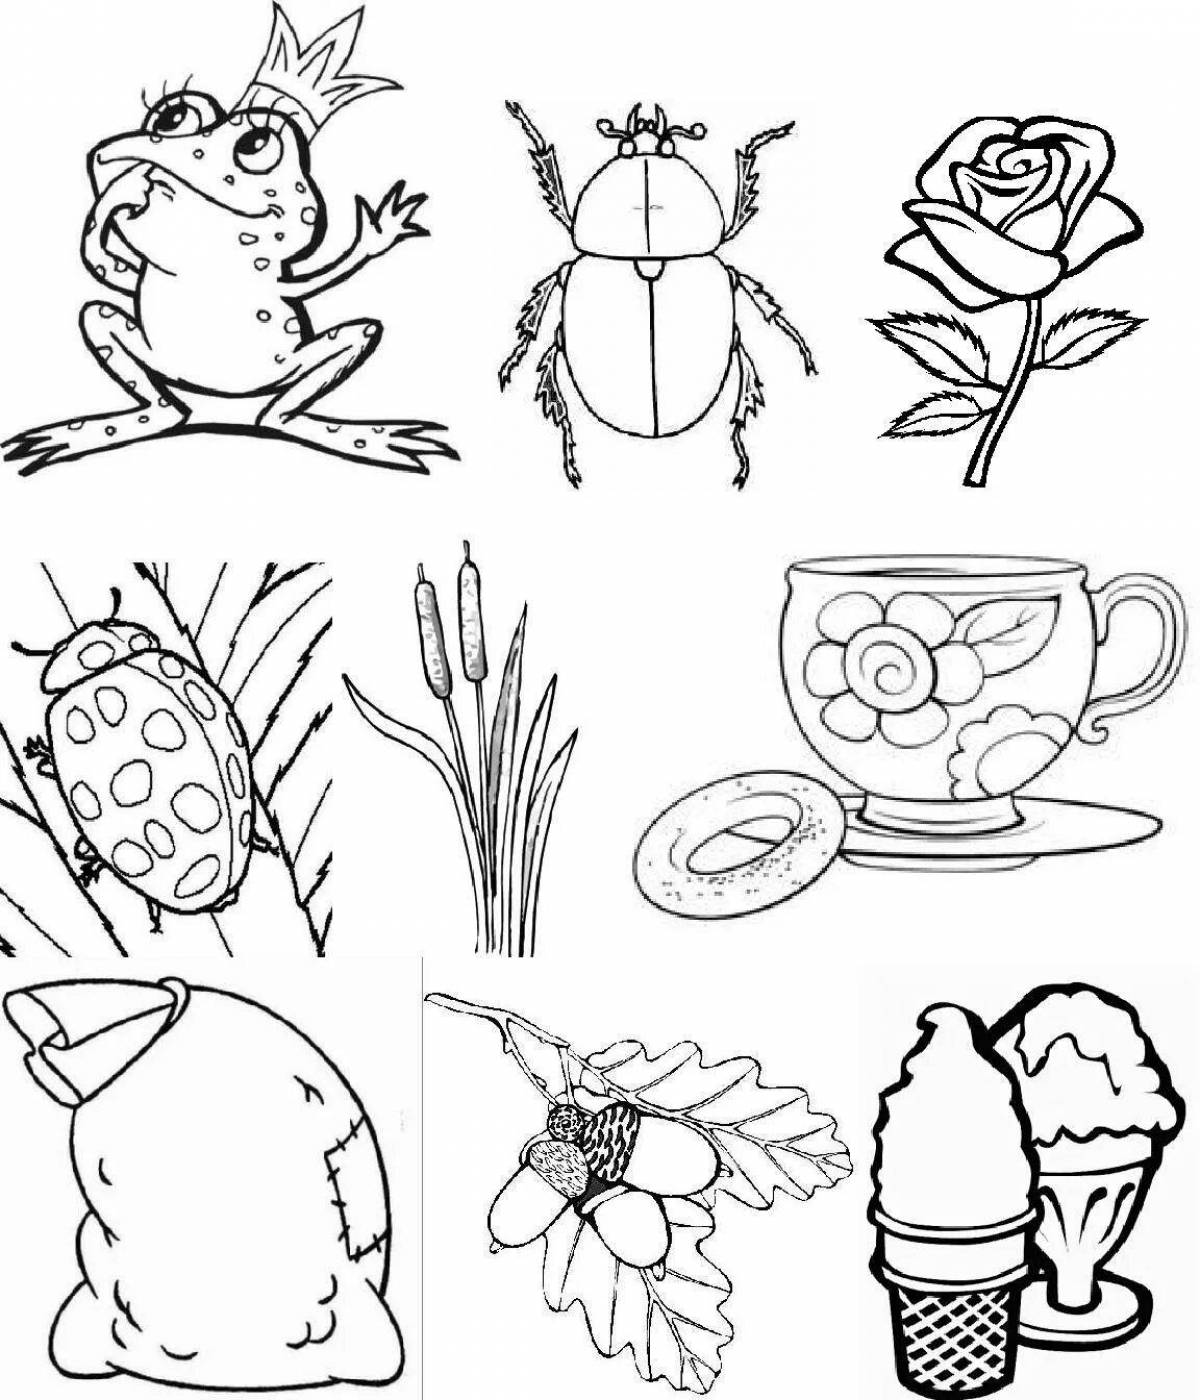 Sh-beginning word shiny coloring page